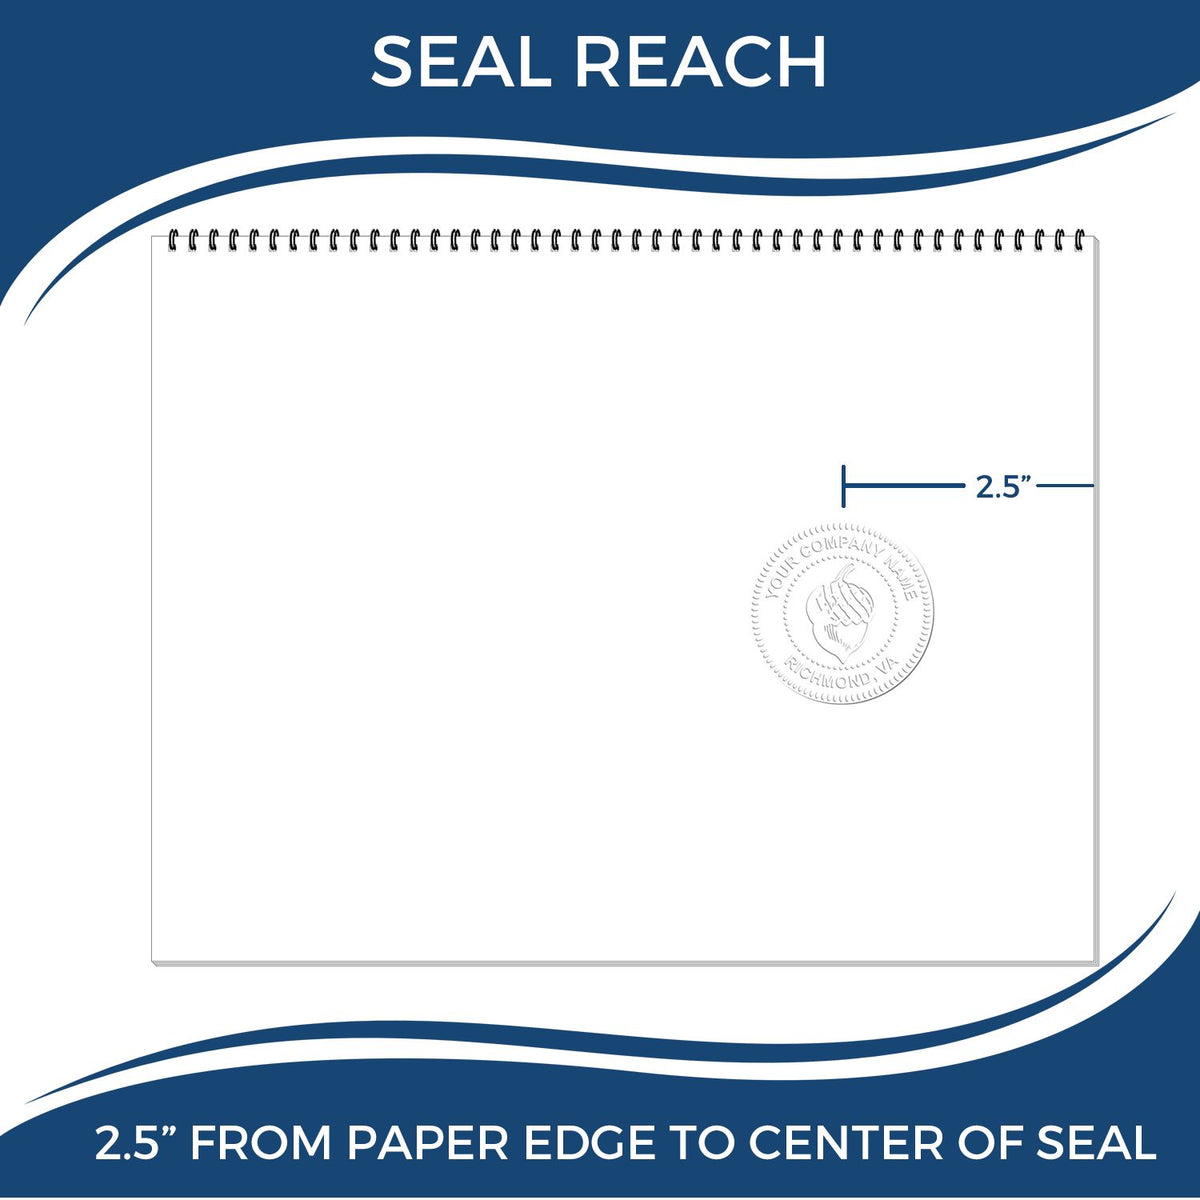 An infographic showing the seal reach which is represented by a ruler and a miniature seal image of the Long Reach Montana PE Seal